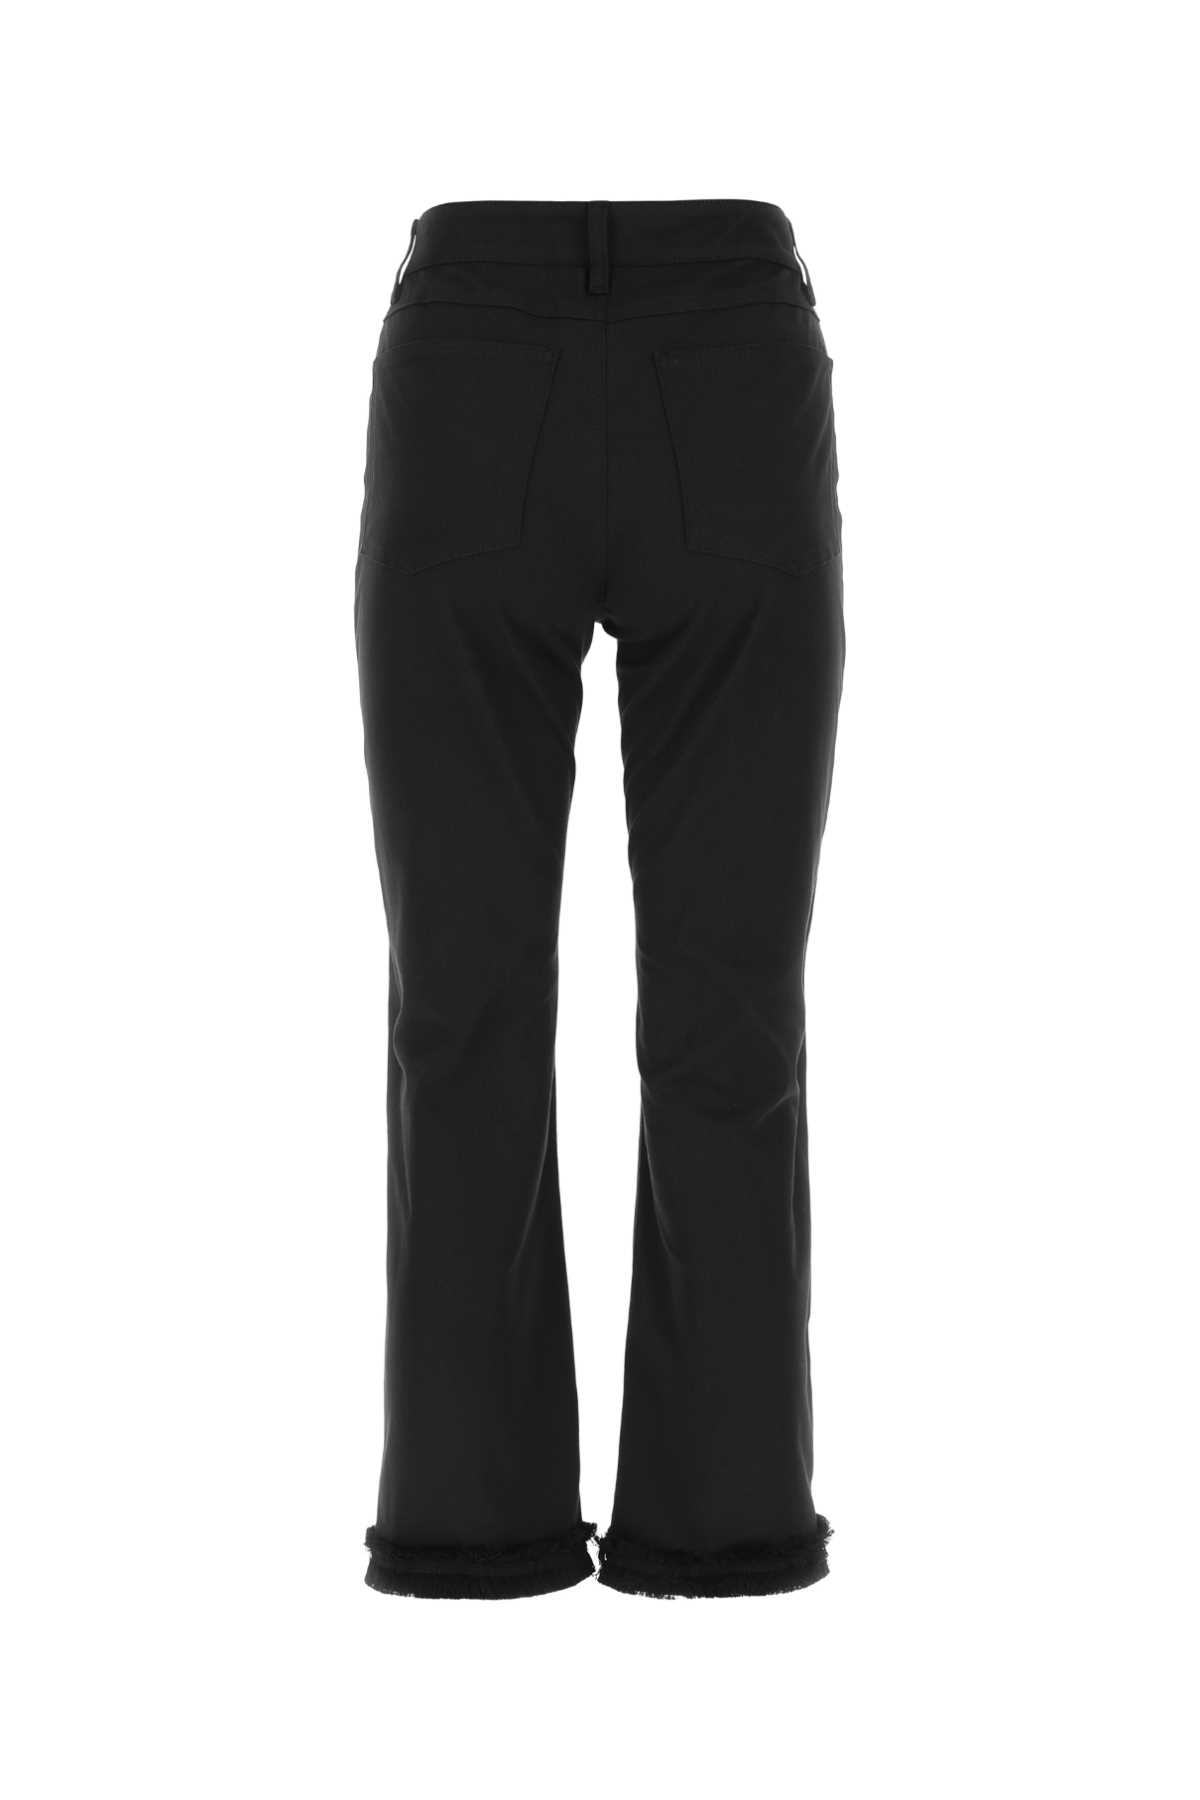 's Max Mara Black Stretch Cotton Tracy Pant In 005